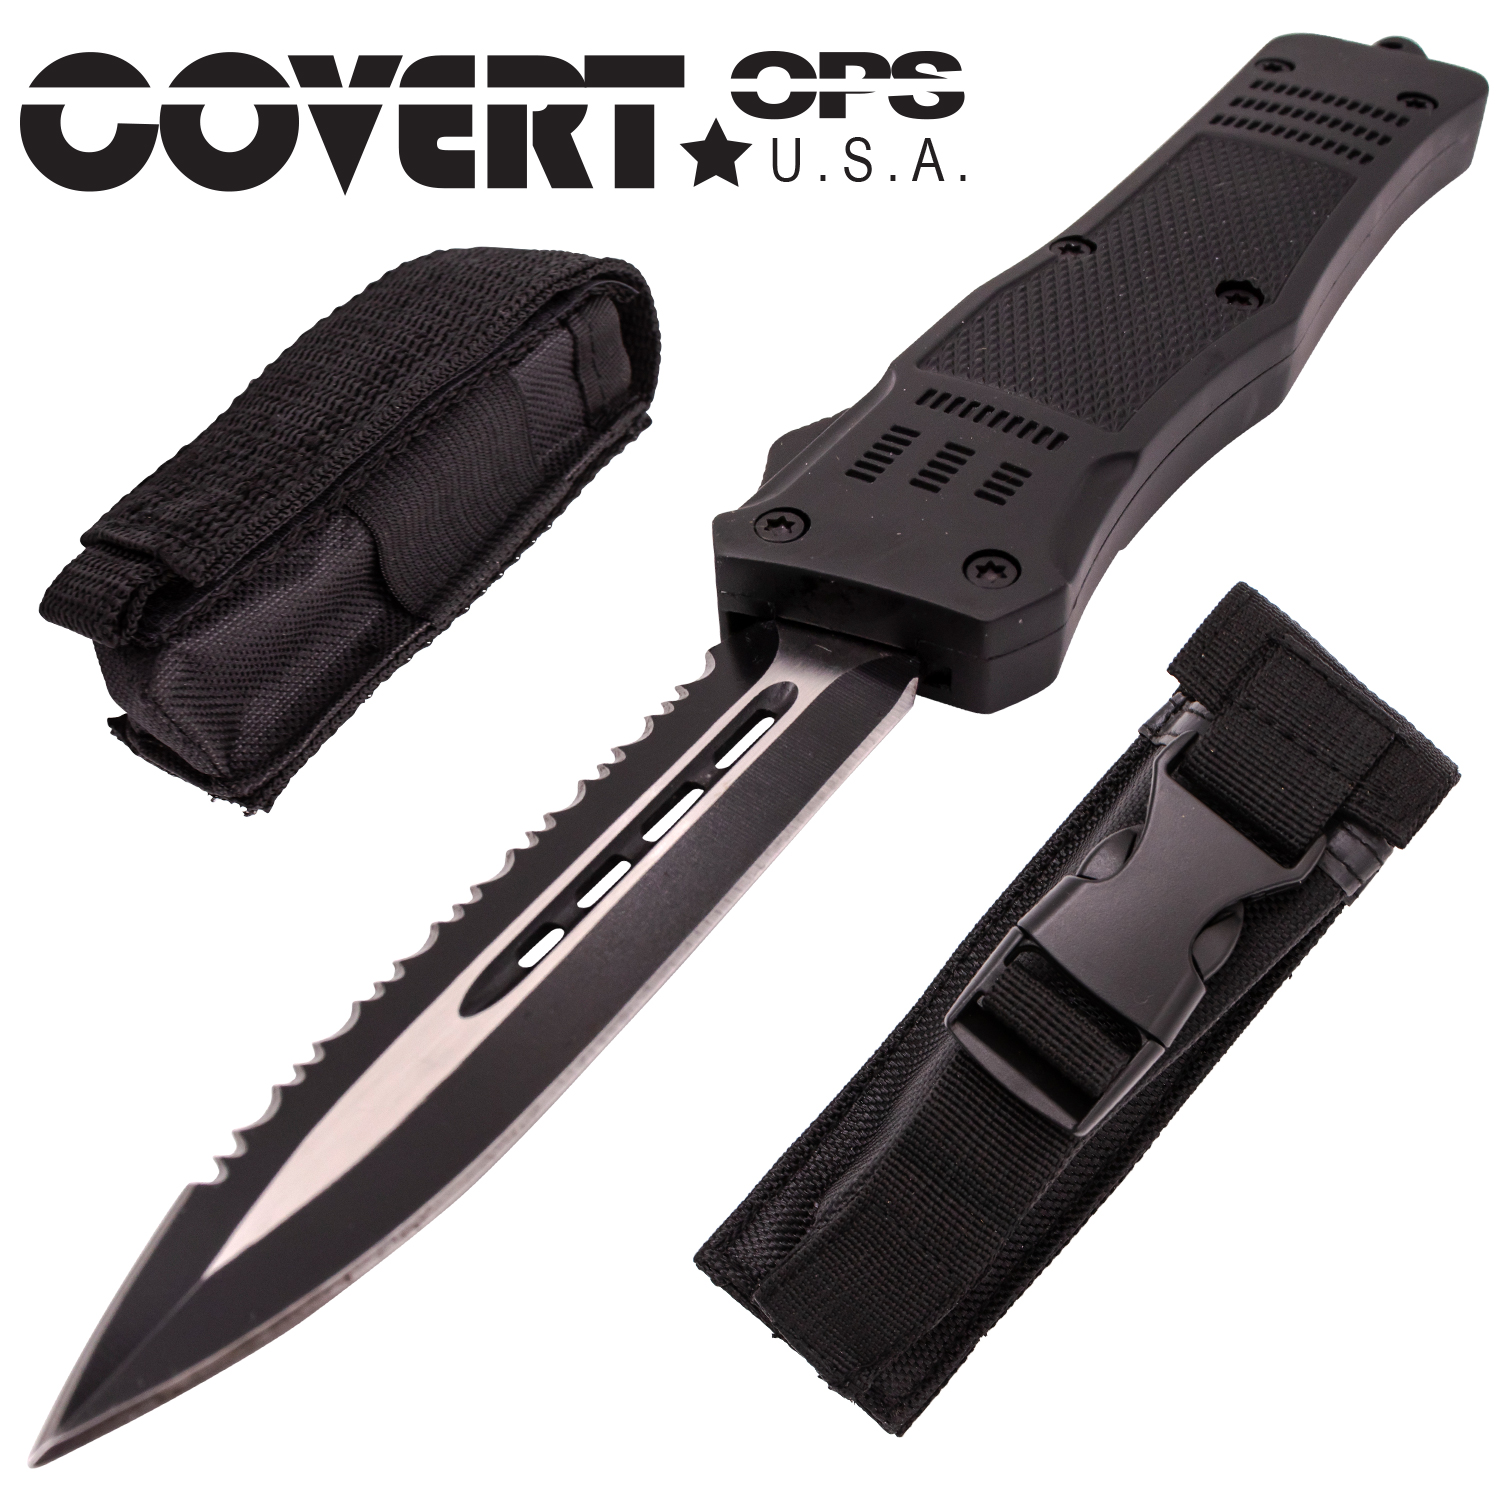 Covert Ops Automatic OTF 9 Inch Dagger Half Serration with Carrying Case